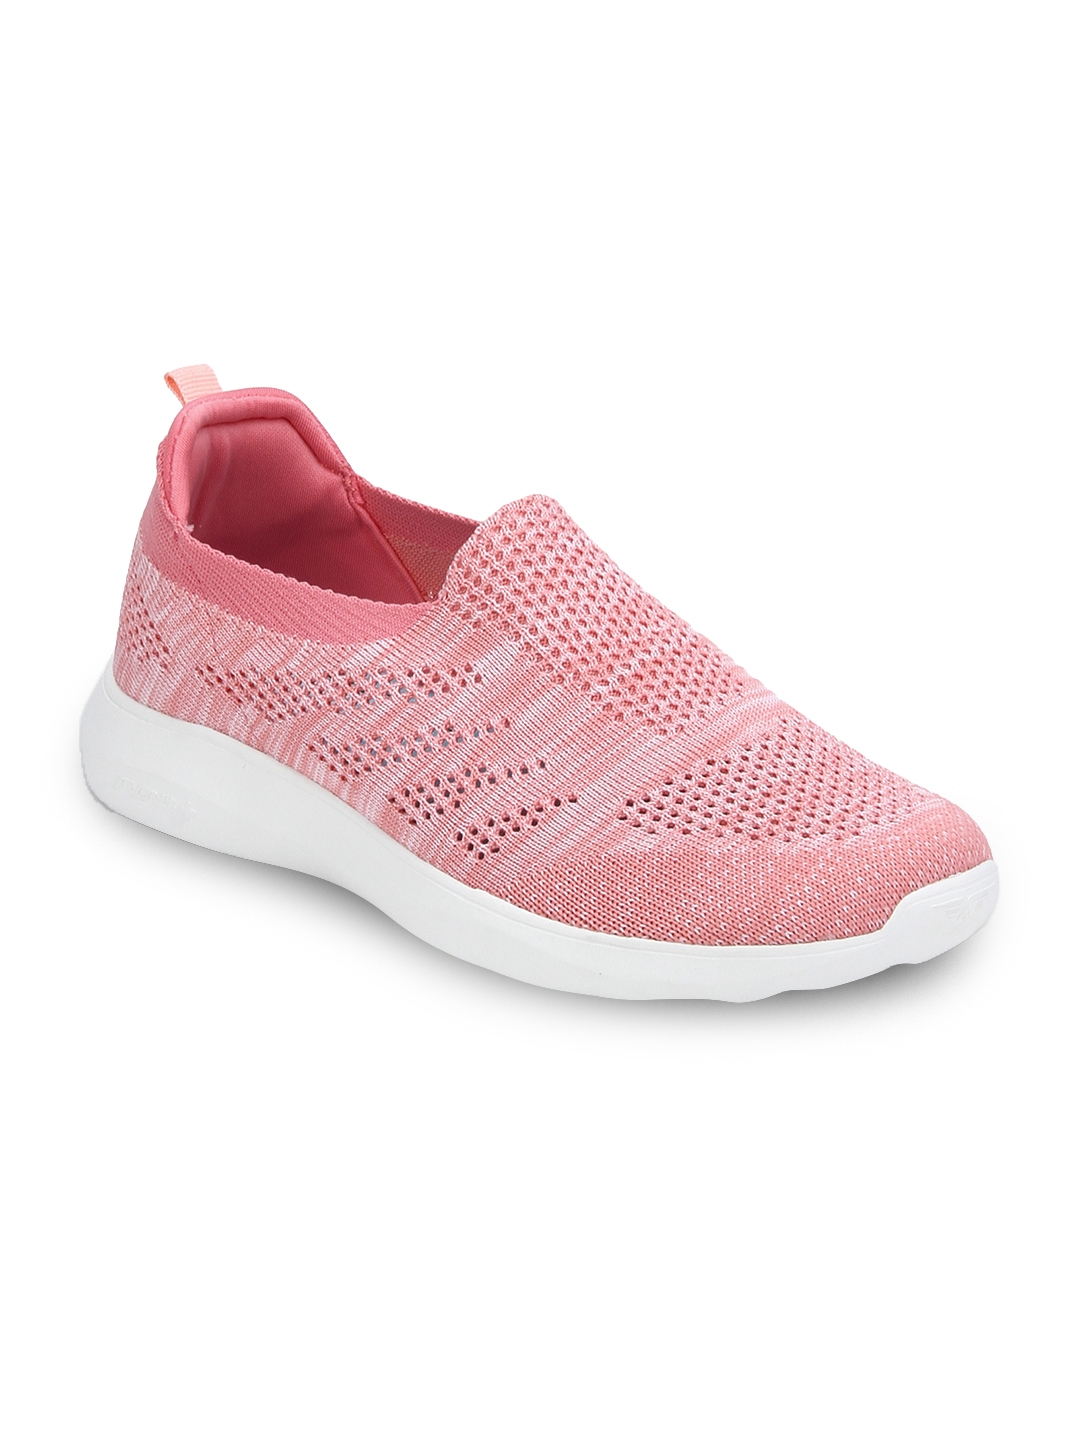 Buy Red Tape Women Pink Walking Shoes - Sports Shoes for Women 5844232 ...